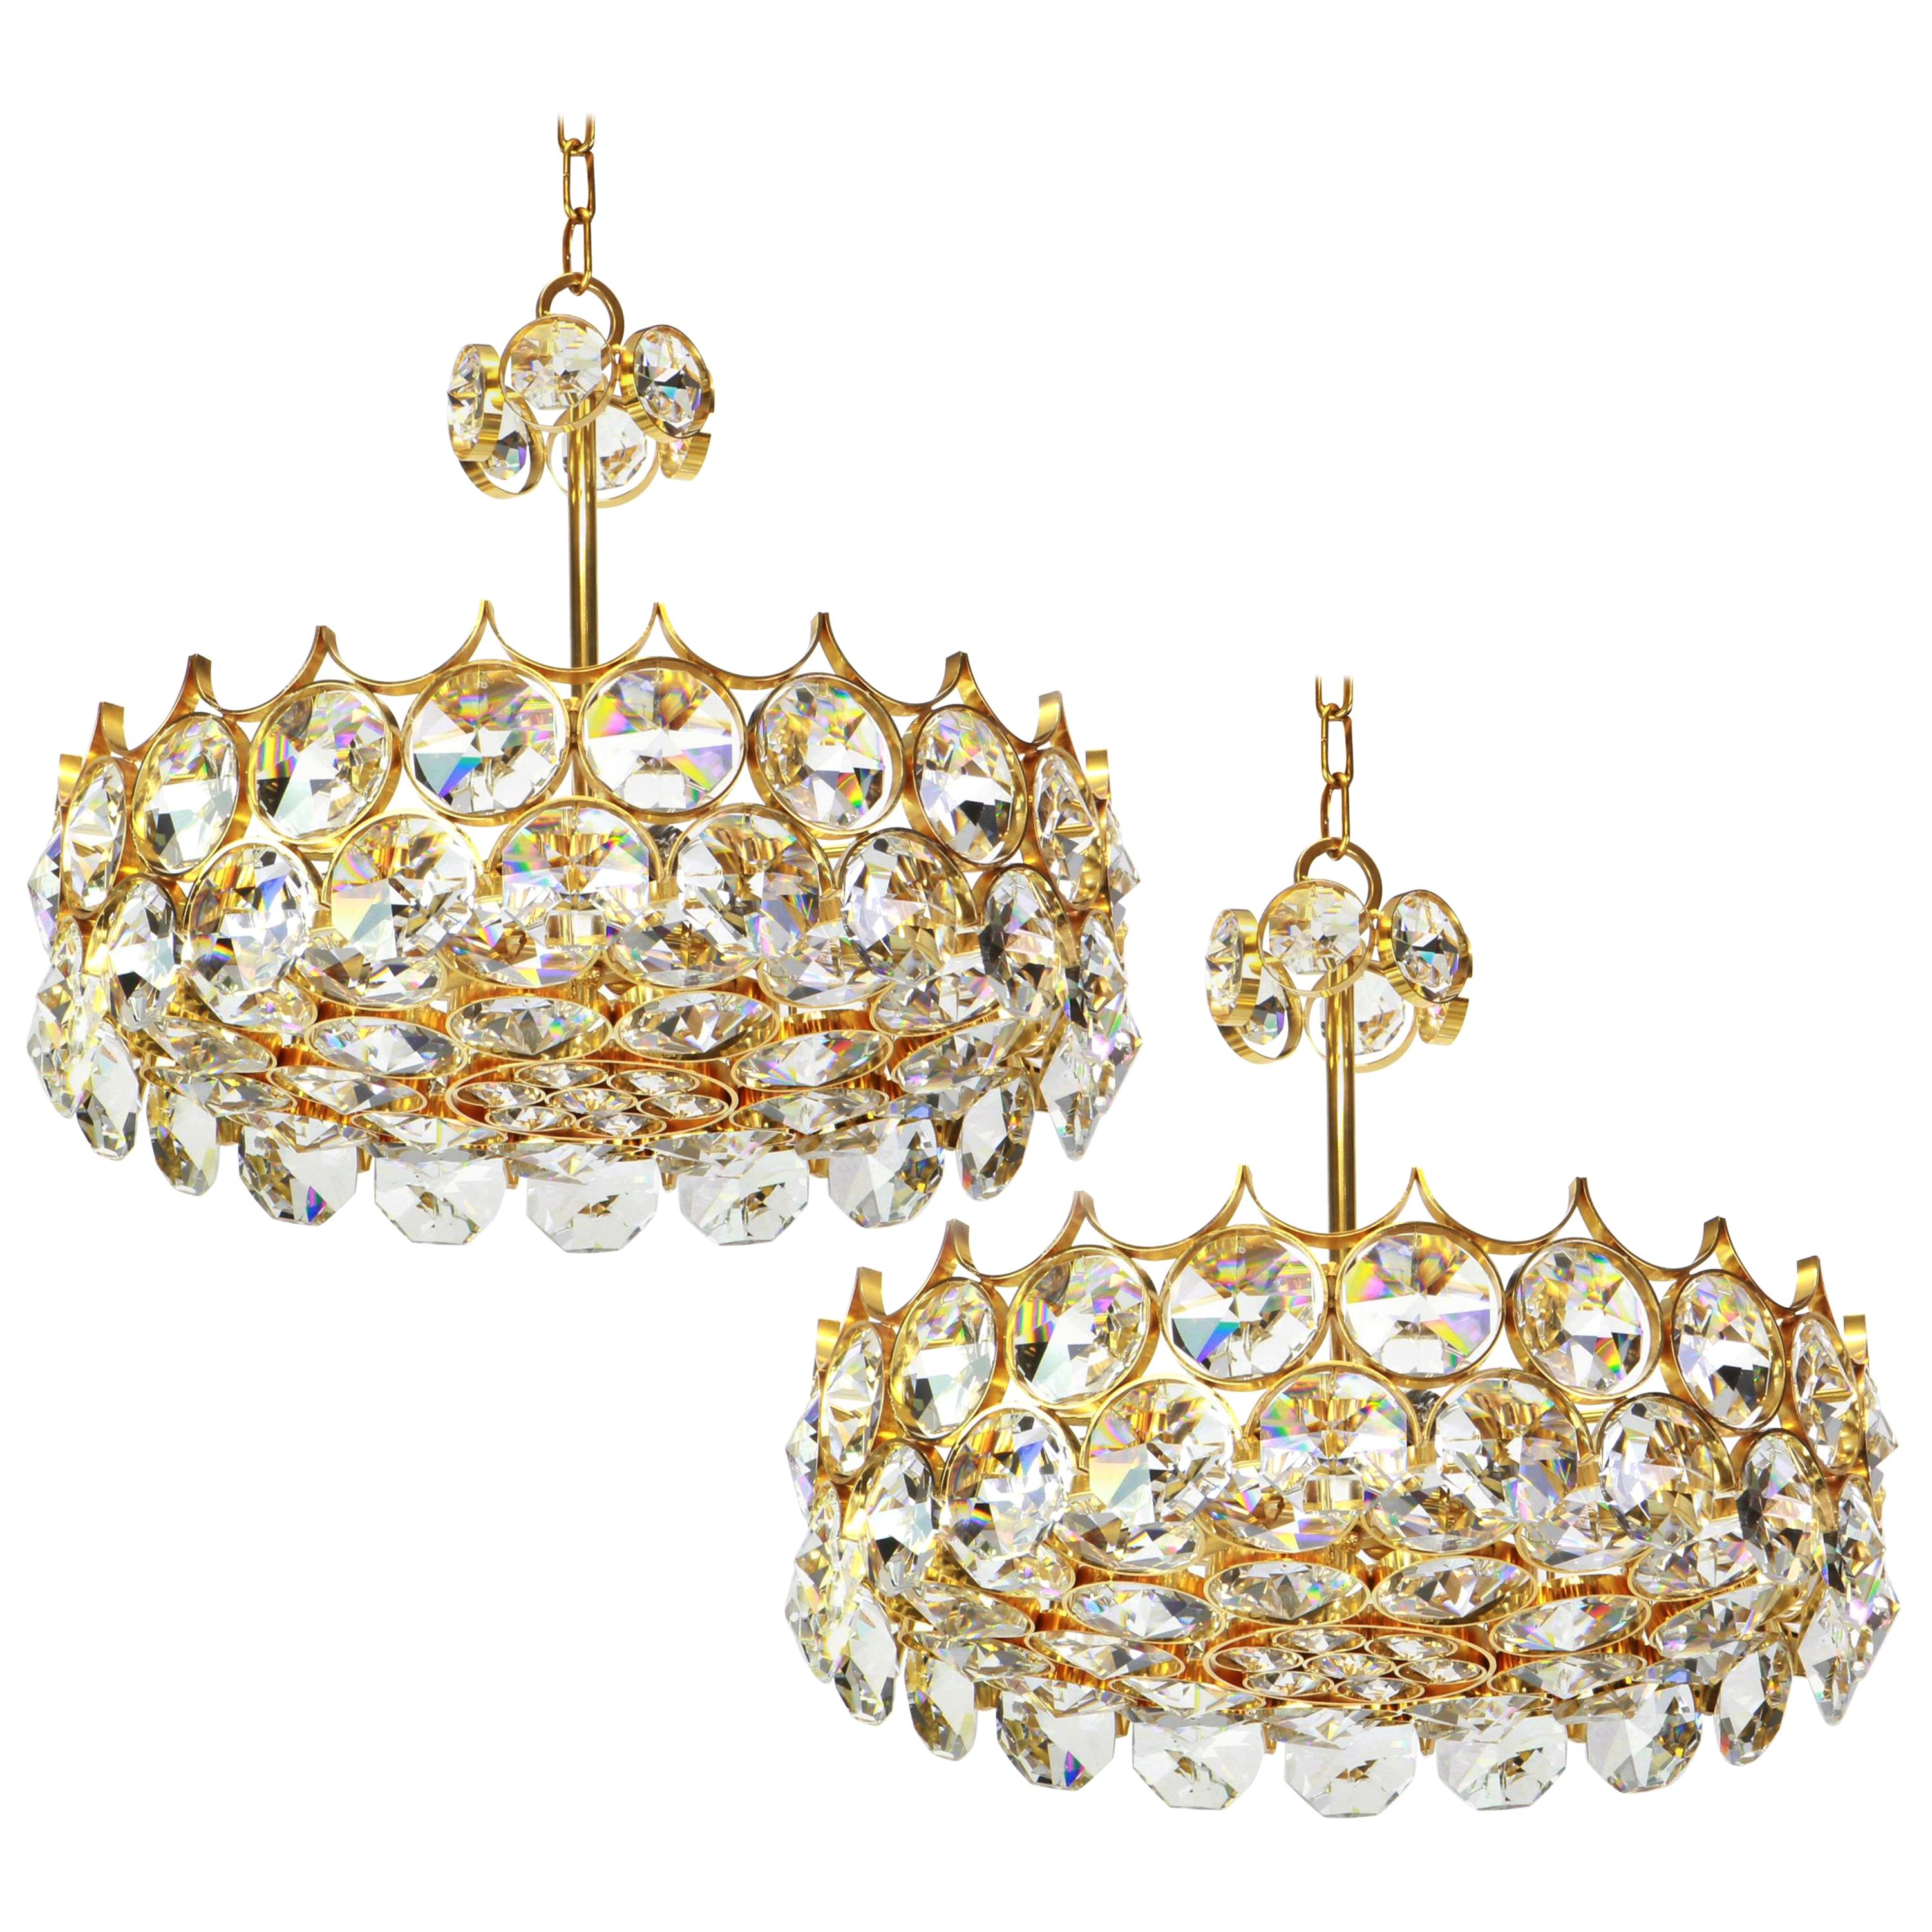 1 of 2 Gilt Brass and Crystal Glass Chandeliers by Palwa, Germany, 1970s